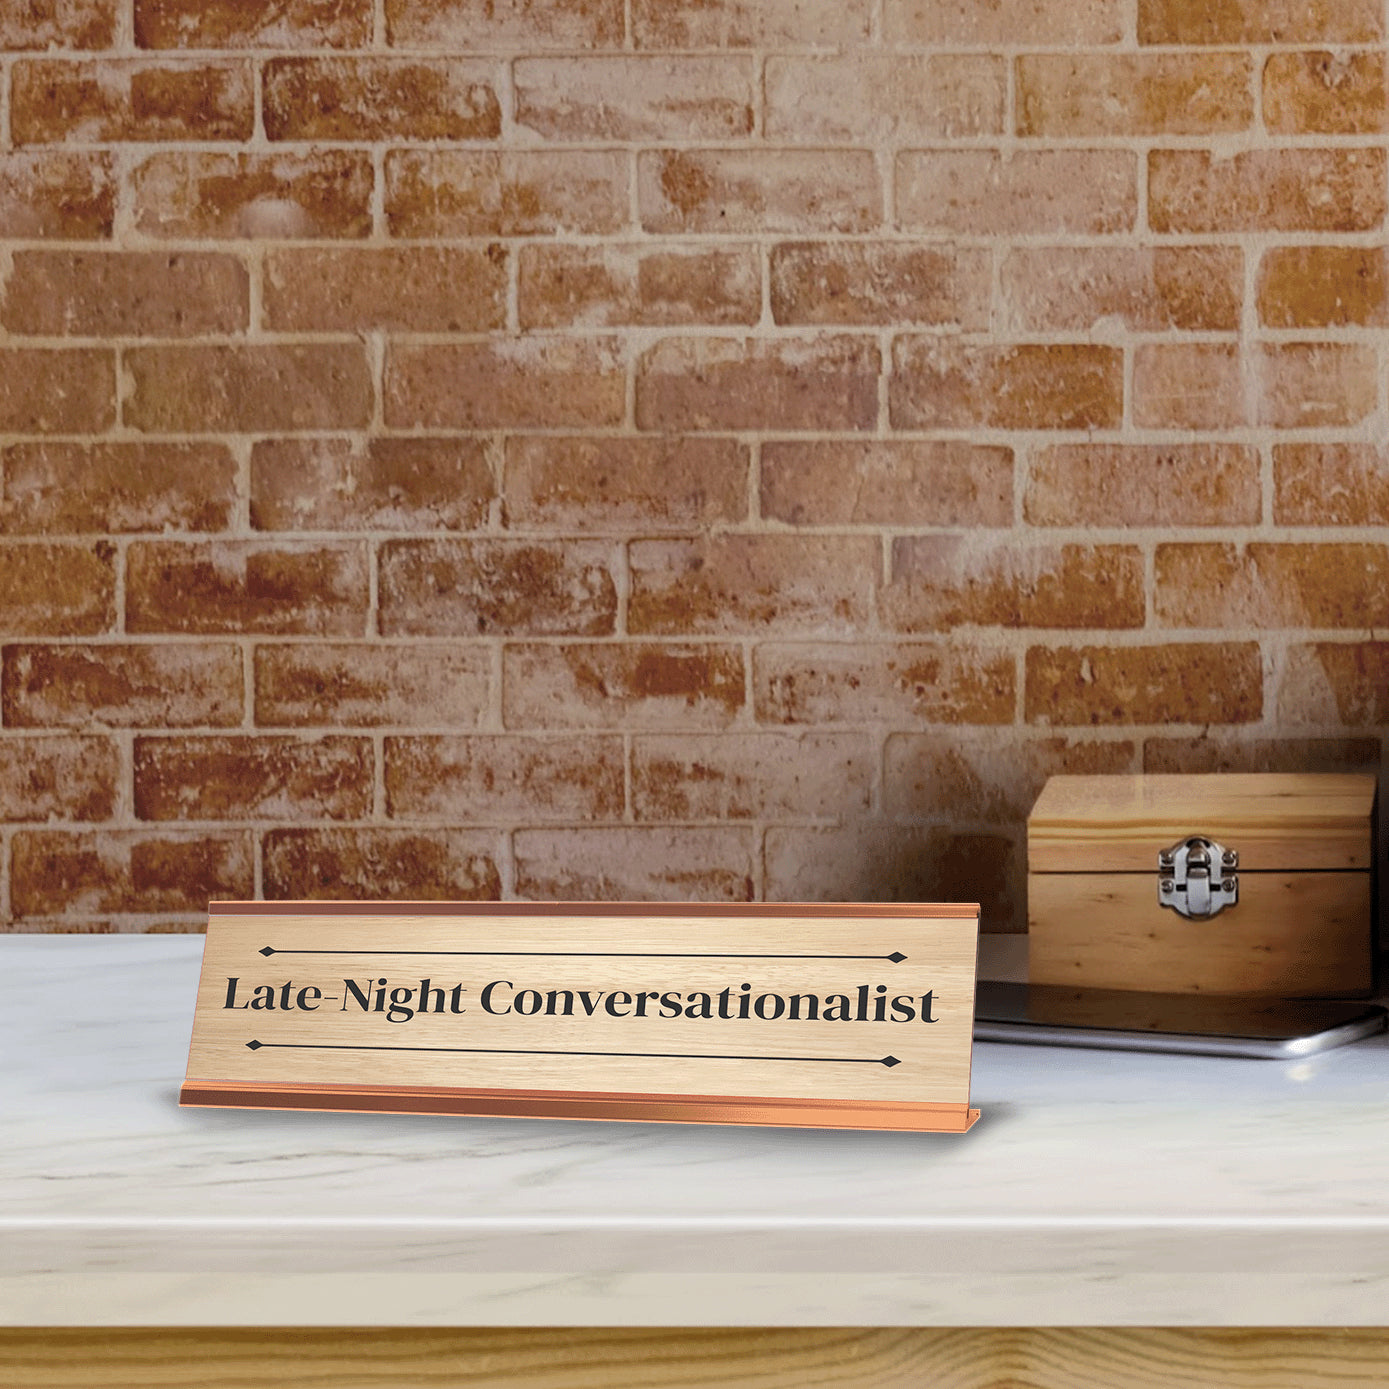 Late-Night Conversationalist Rose Gold Frame Desk Sign (2x8") | Novelty Workplace and Home Office Decoration For Him